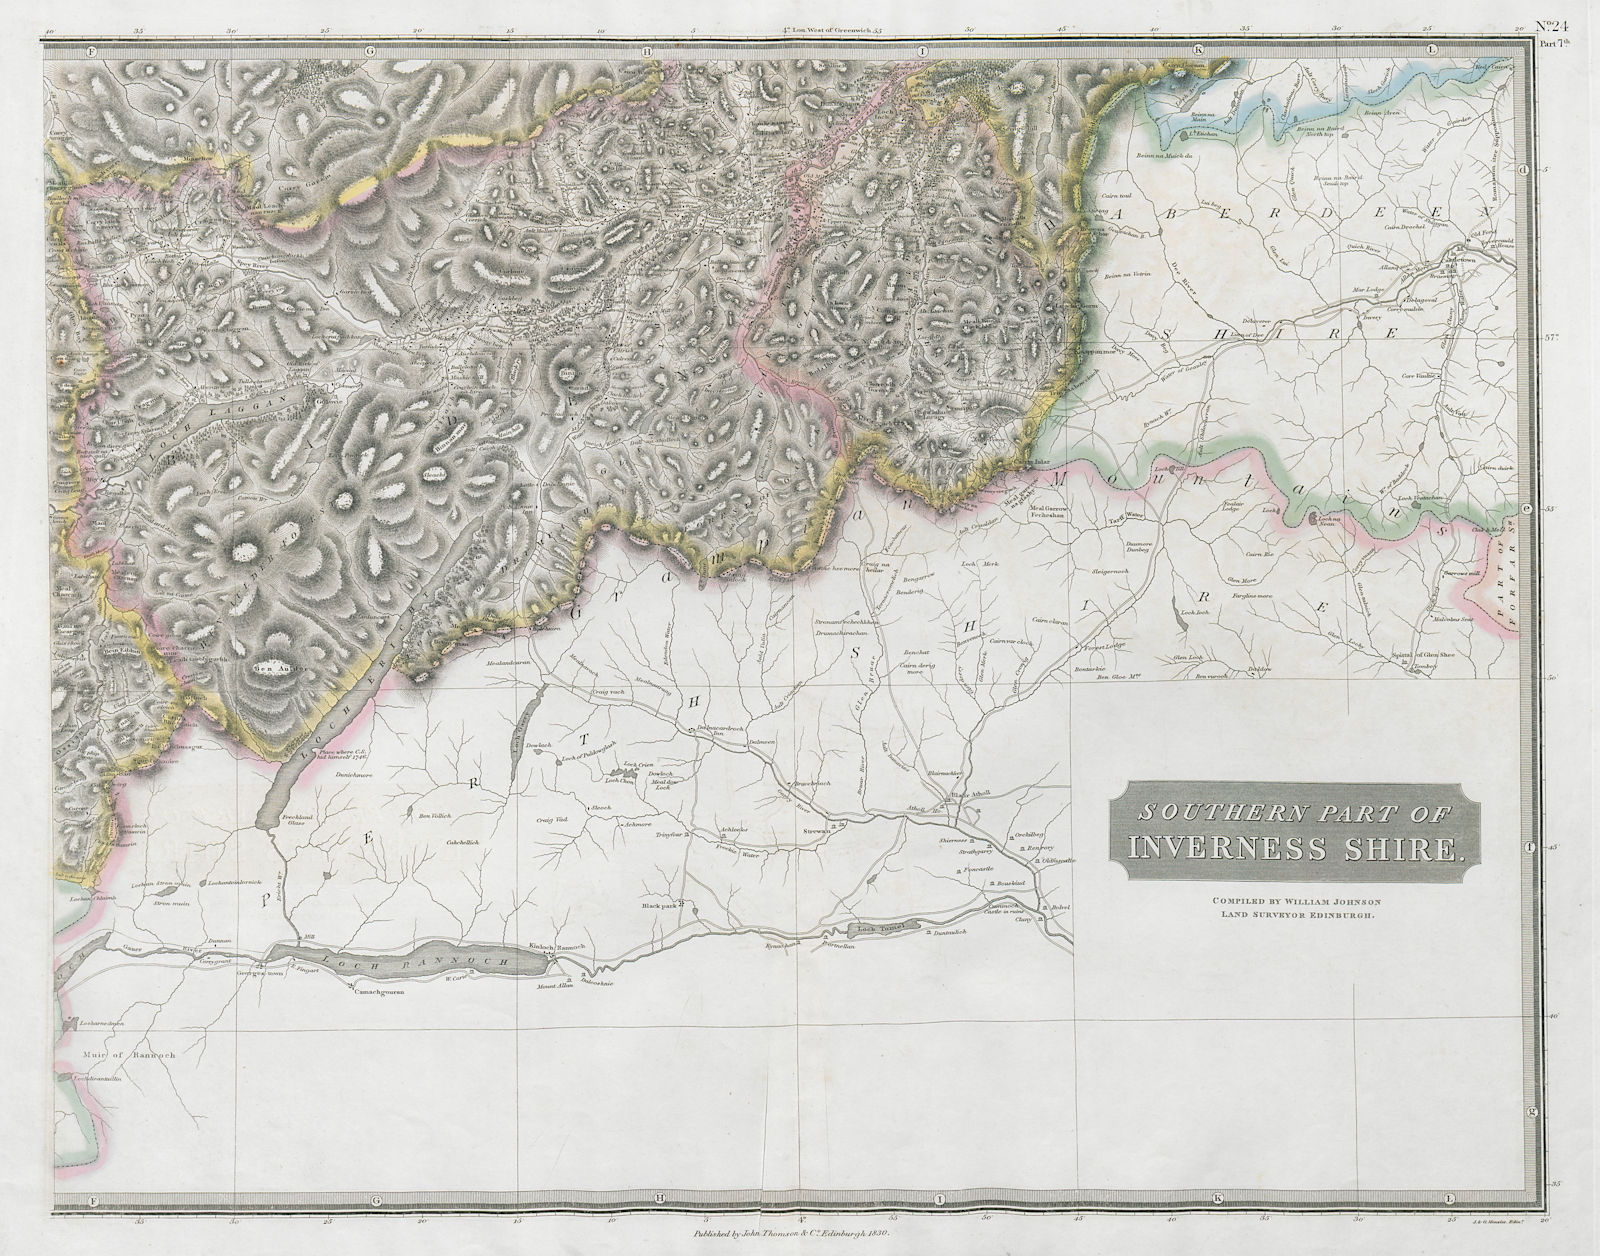 Associate Product Inverness-shire south-east sheet. Ericht Cairngorms Kingussie. THOMSON 1832 map